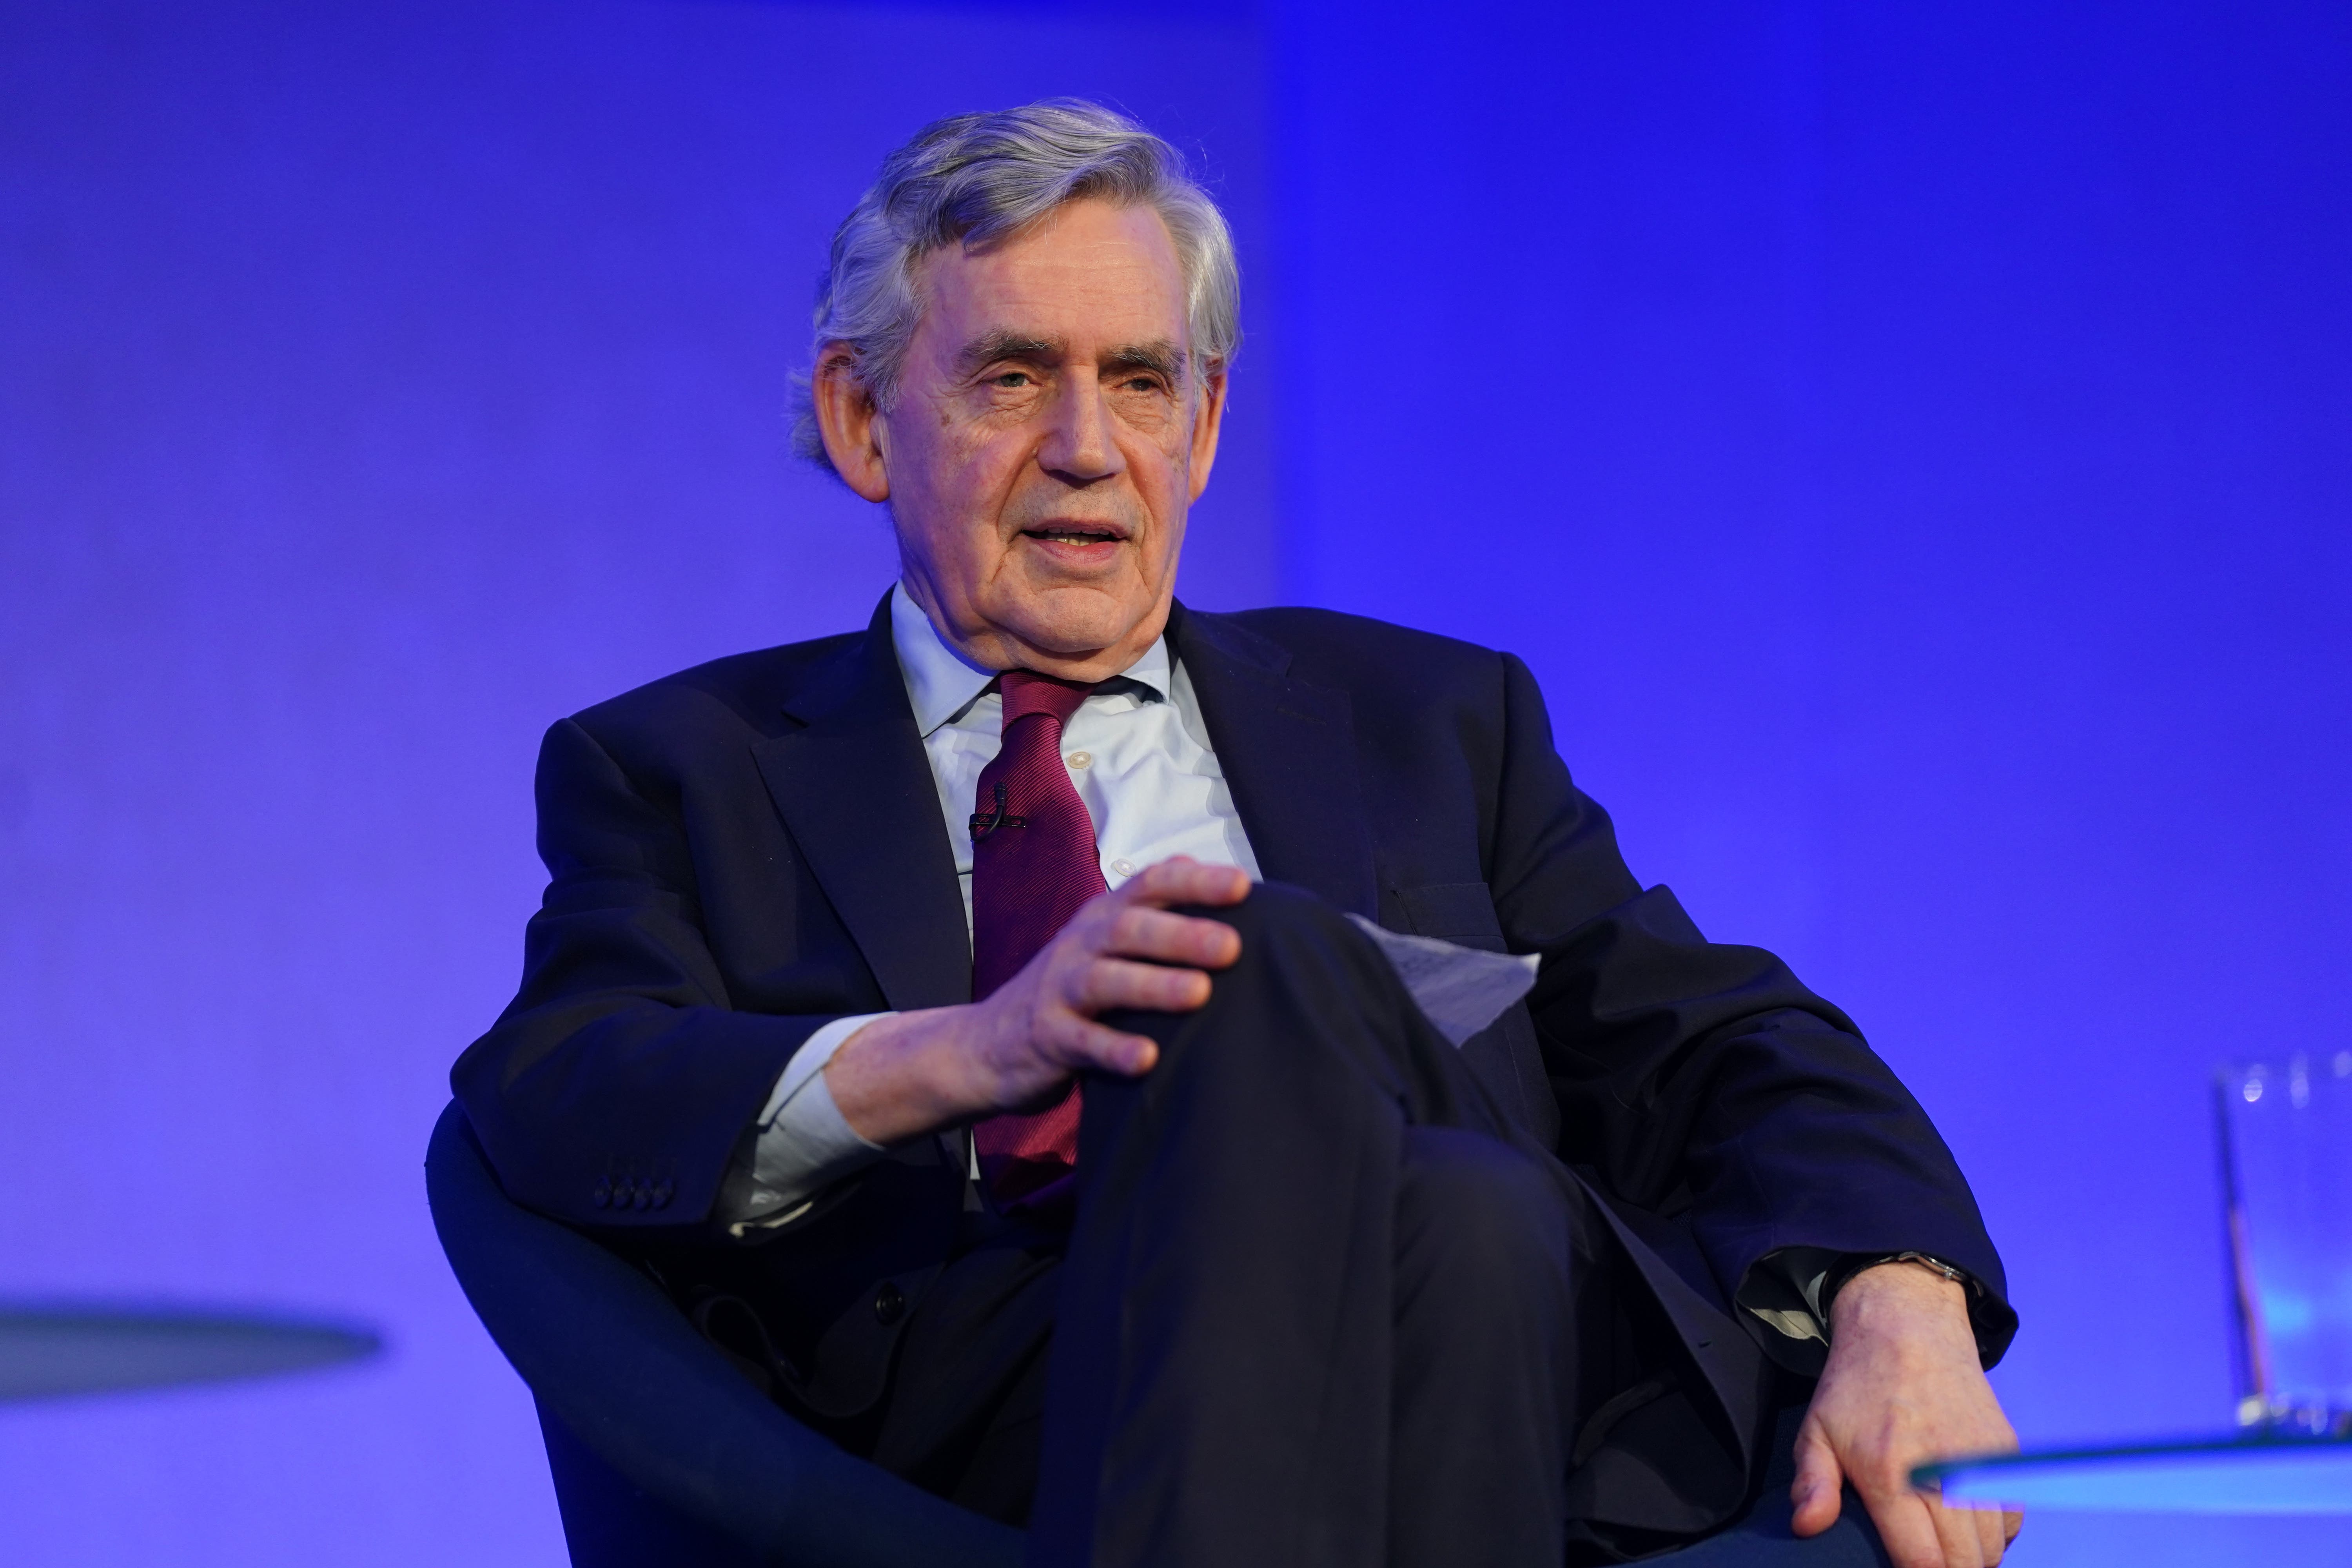 The highest award went to Gordon Brown, who was made a Companion of Honour